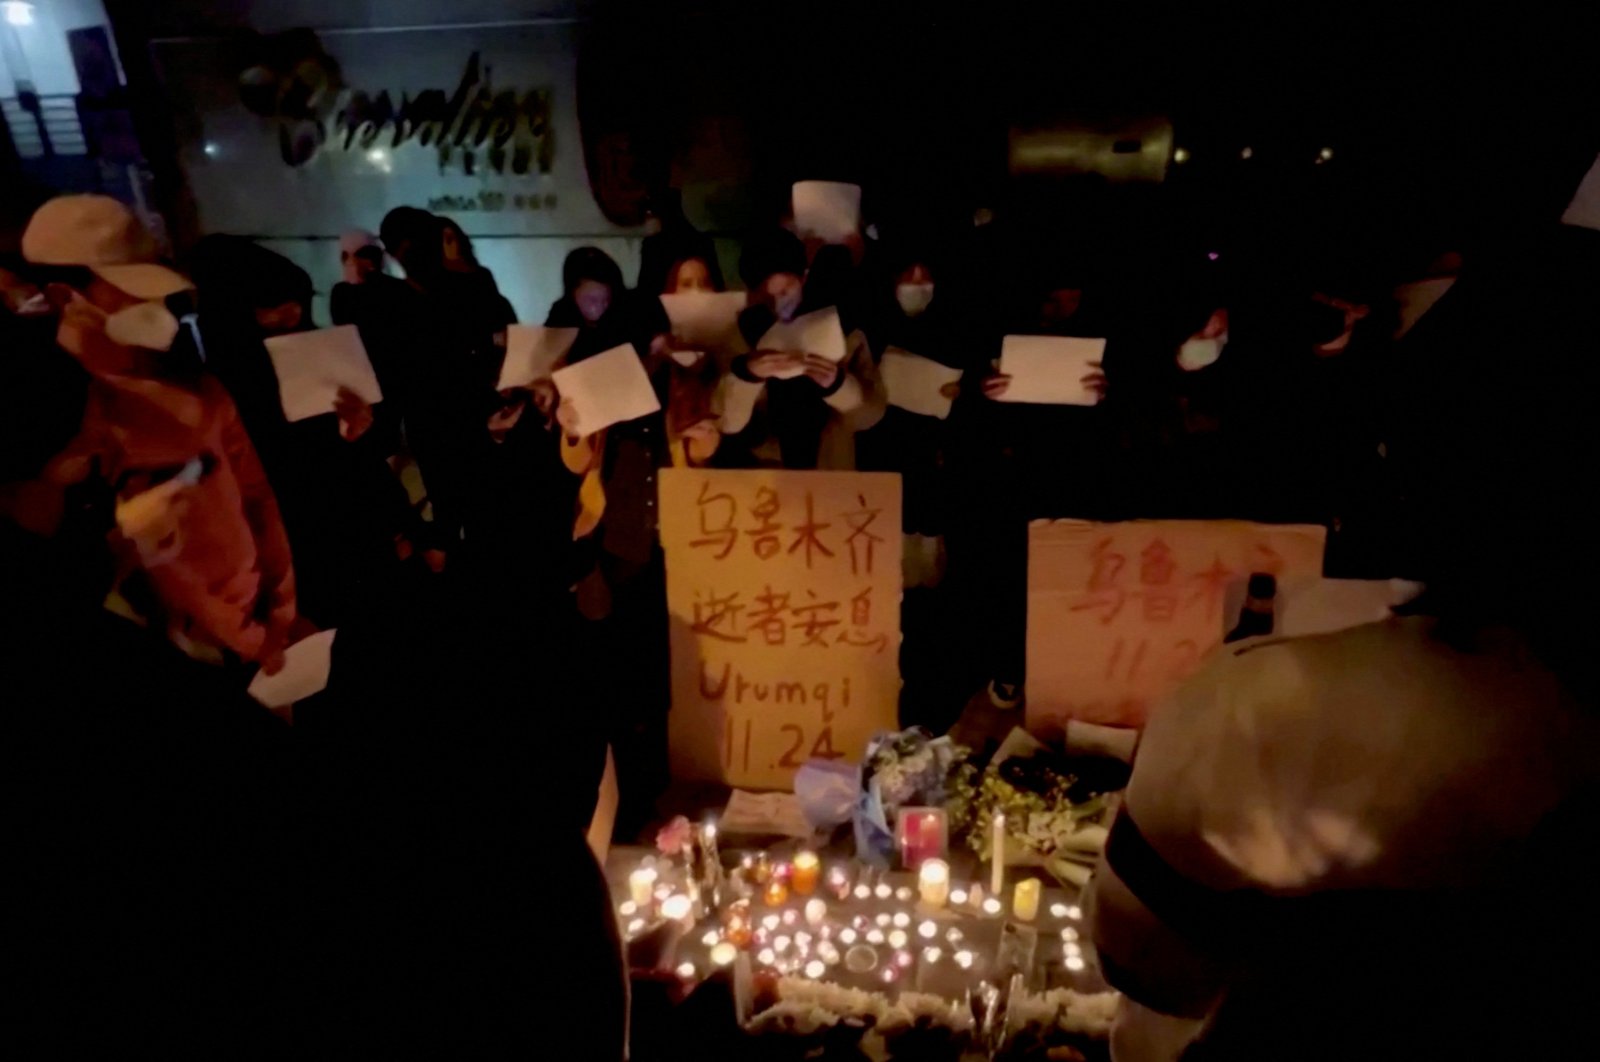 This picture obtained from a social media video shows people holding signs and lighting candles during a vigil held for the victims of the Urumqi fire, in Shanghai, China, Nov. 26, 2022. (Reuters Photo)